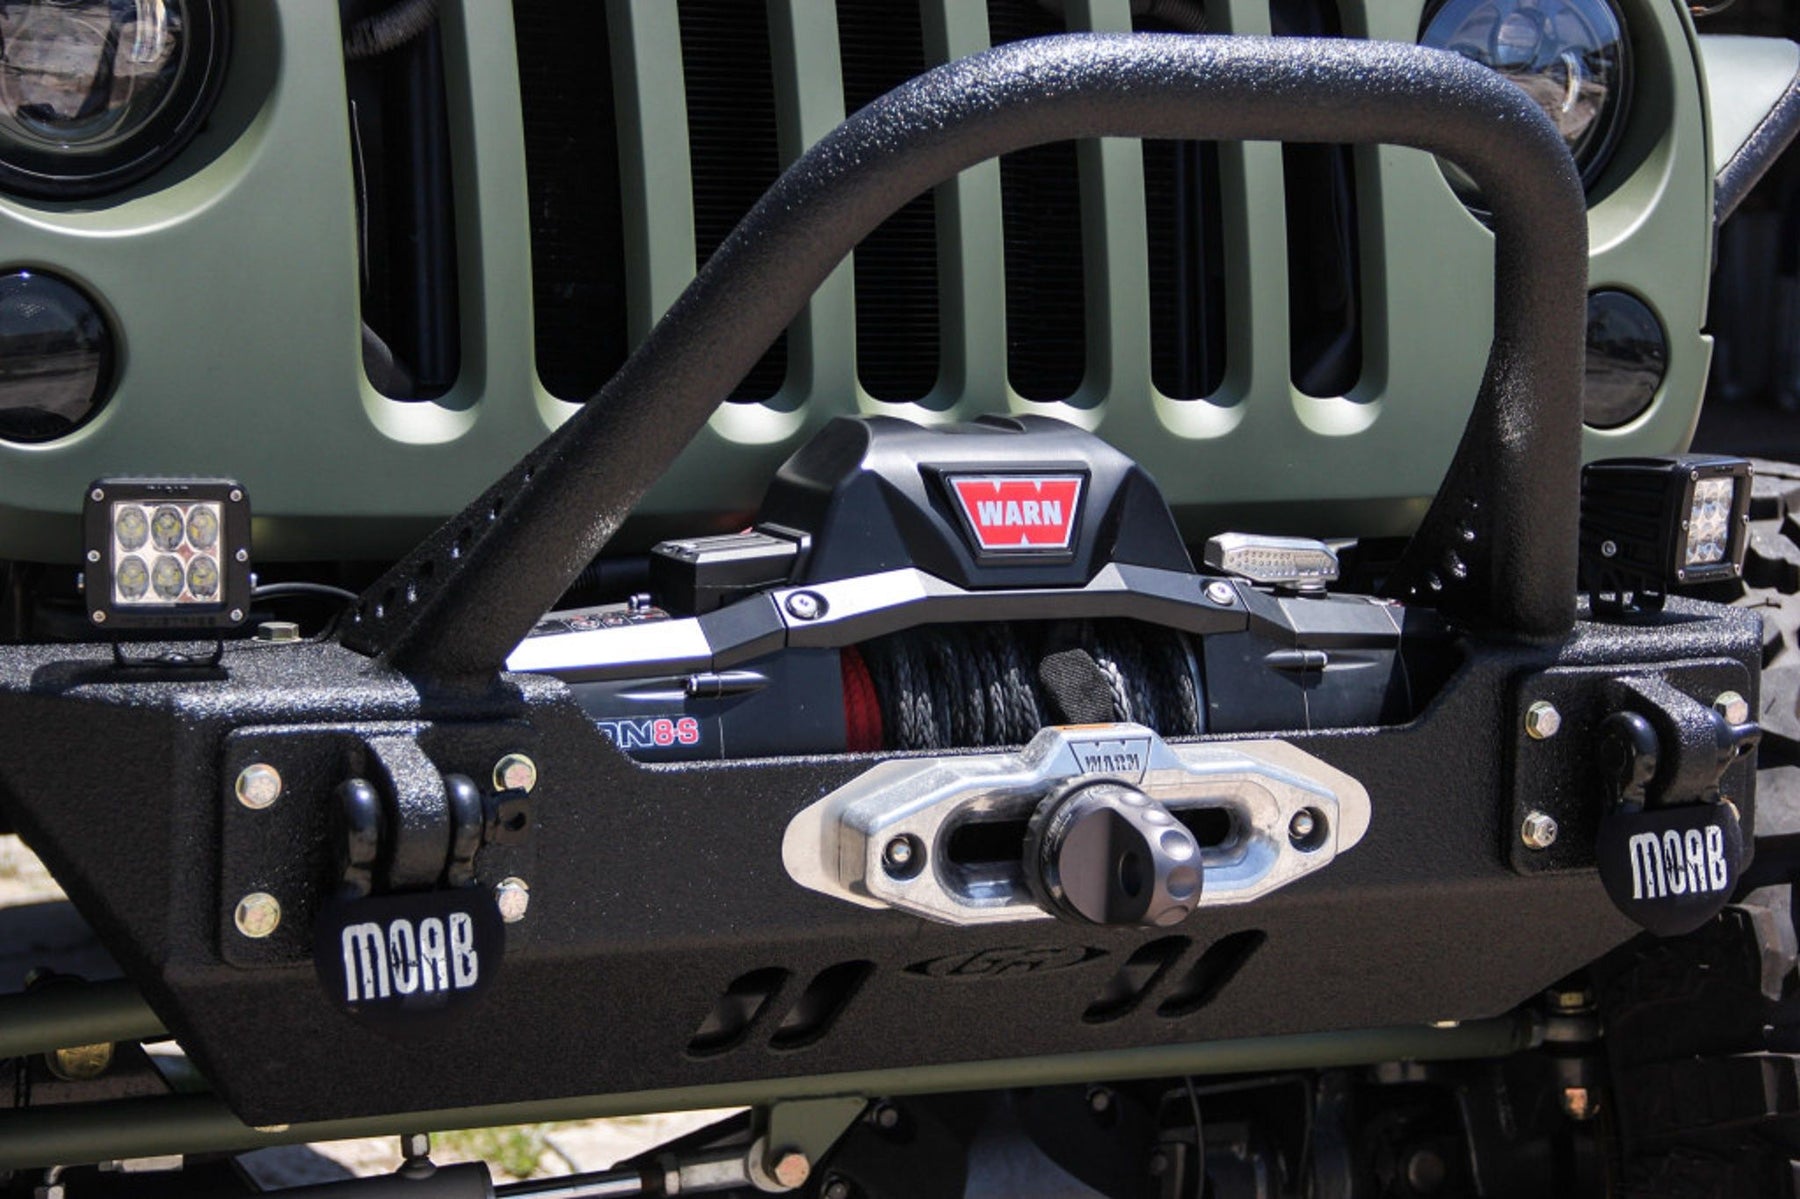 Best Winch for Offroading 4x4